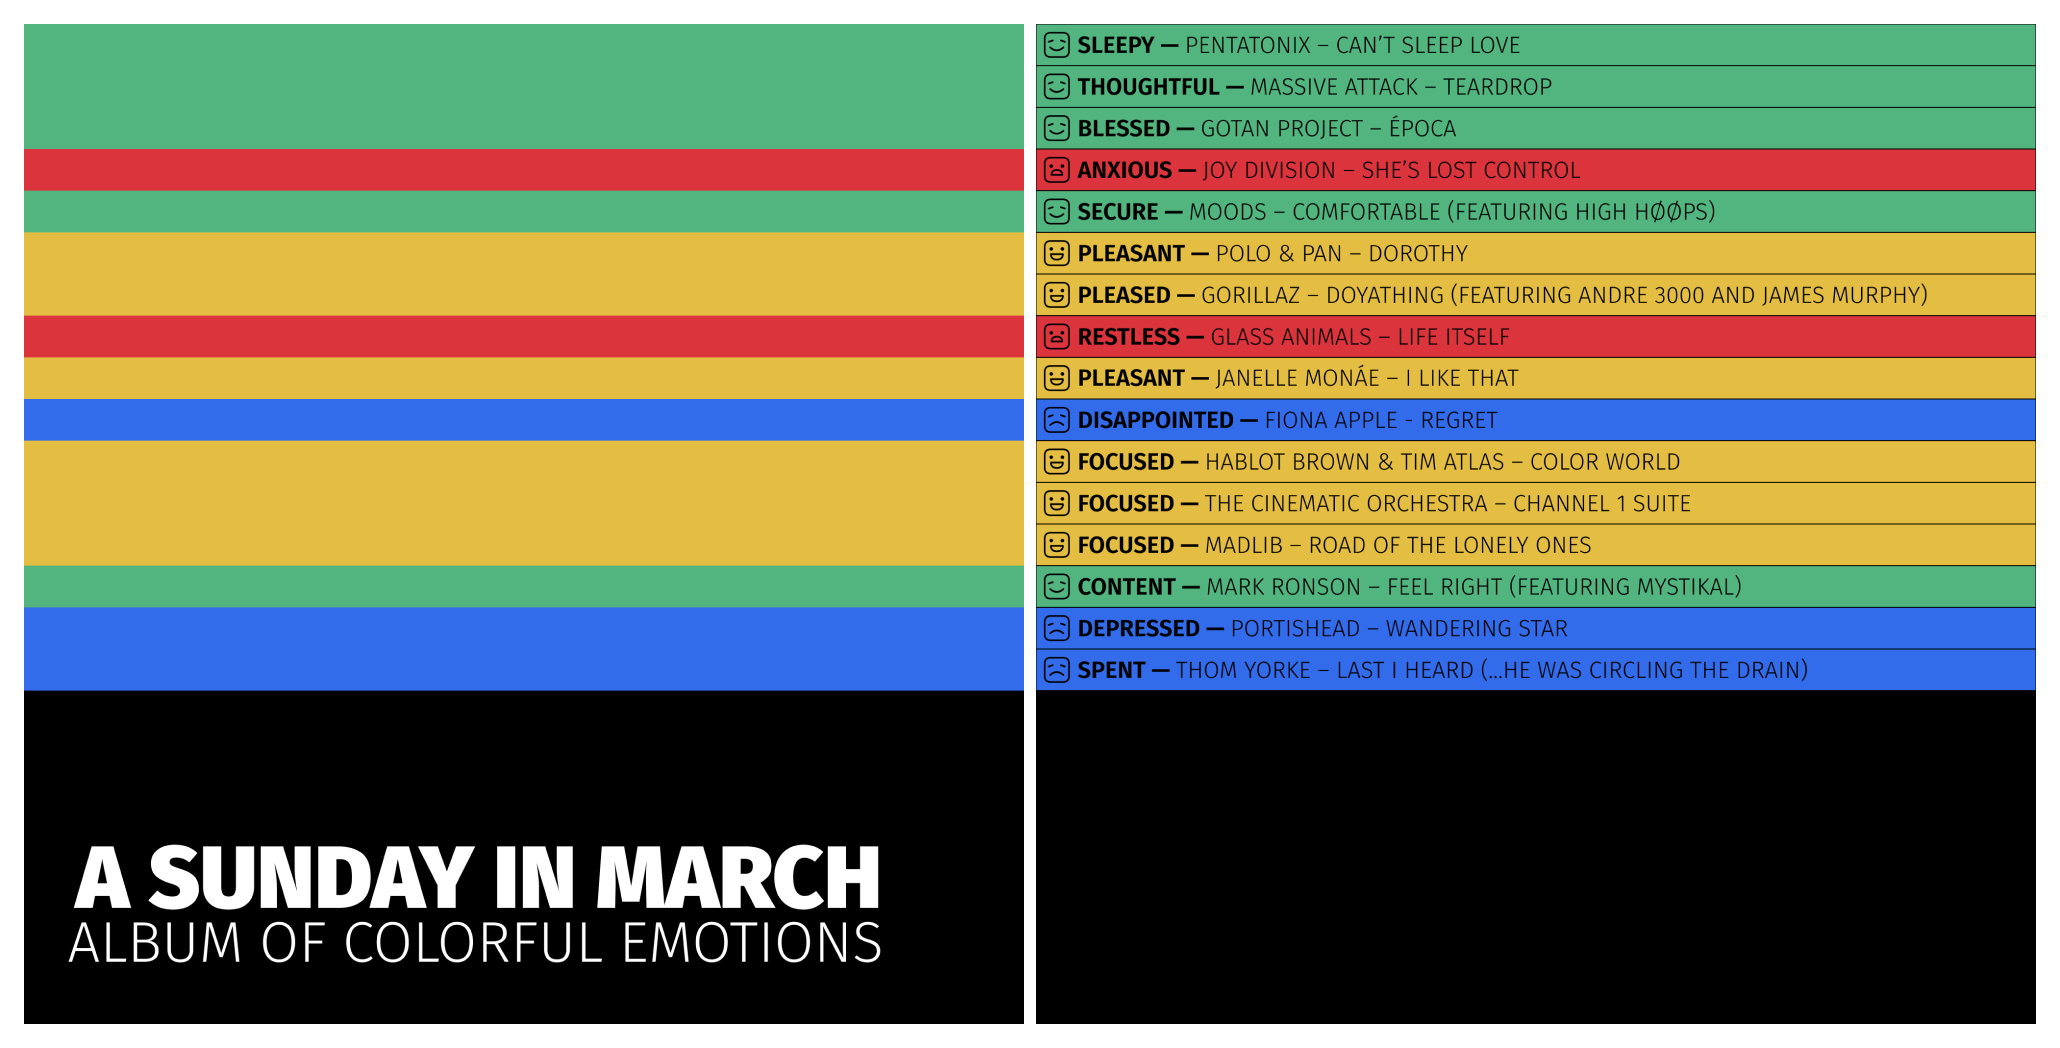 Album art with songs color-coded to mood